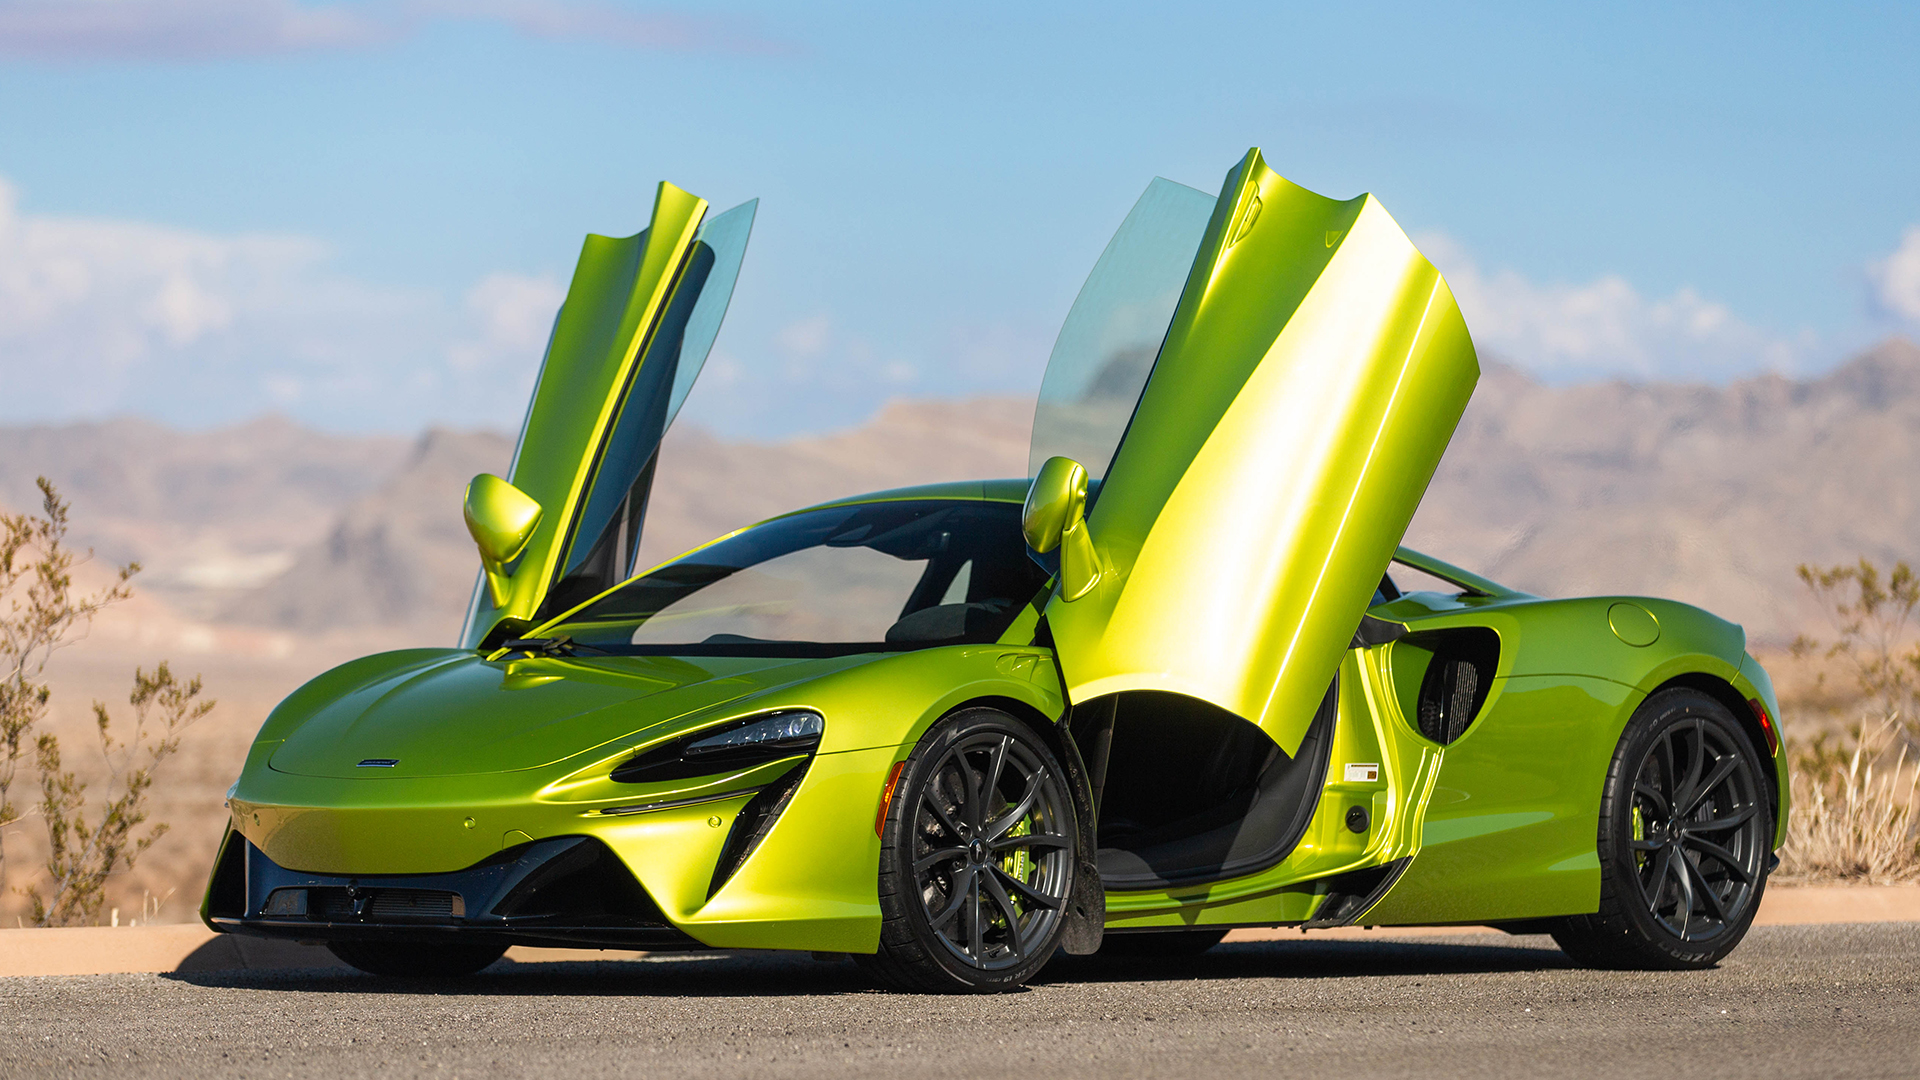 The 2023 McLaren Artura Is the Supercar Worth Getting Excited About